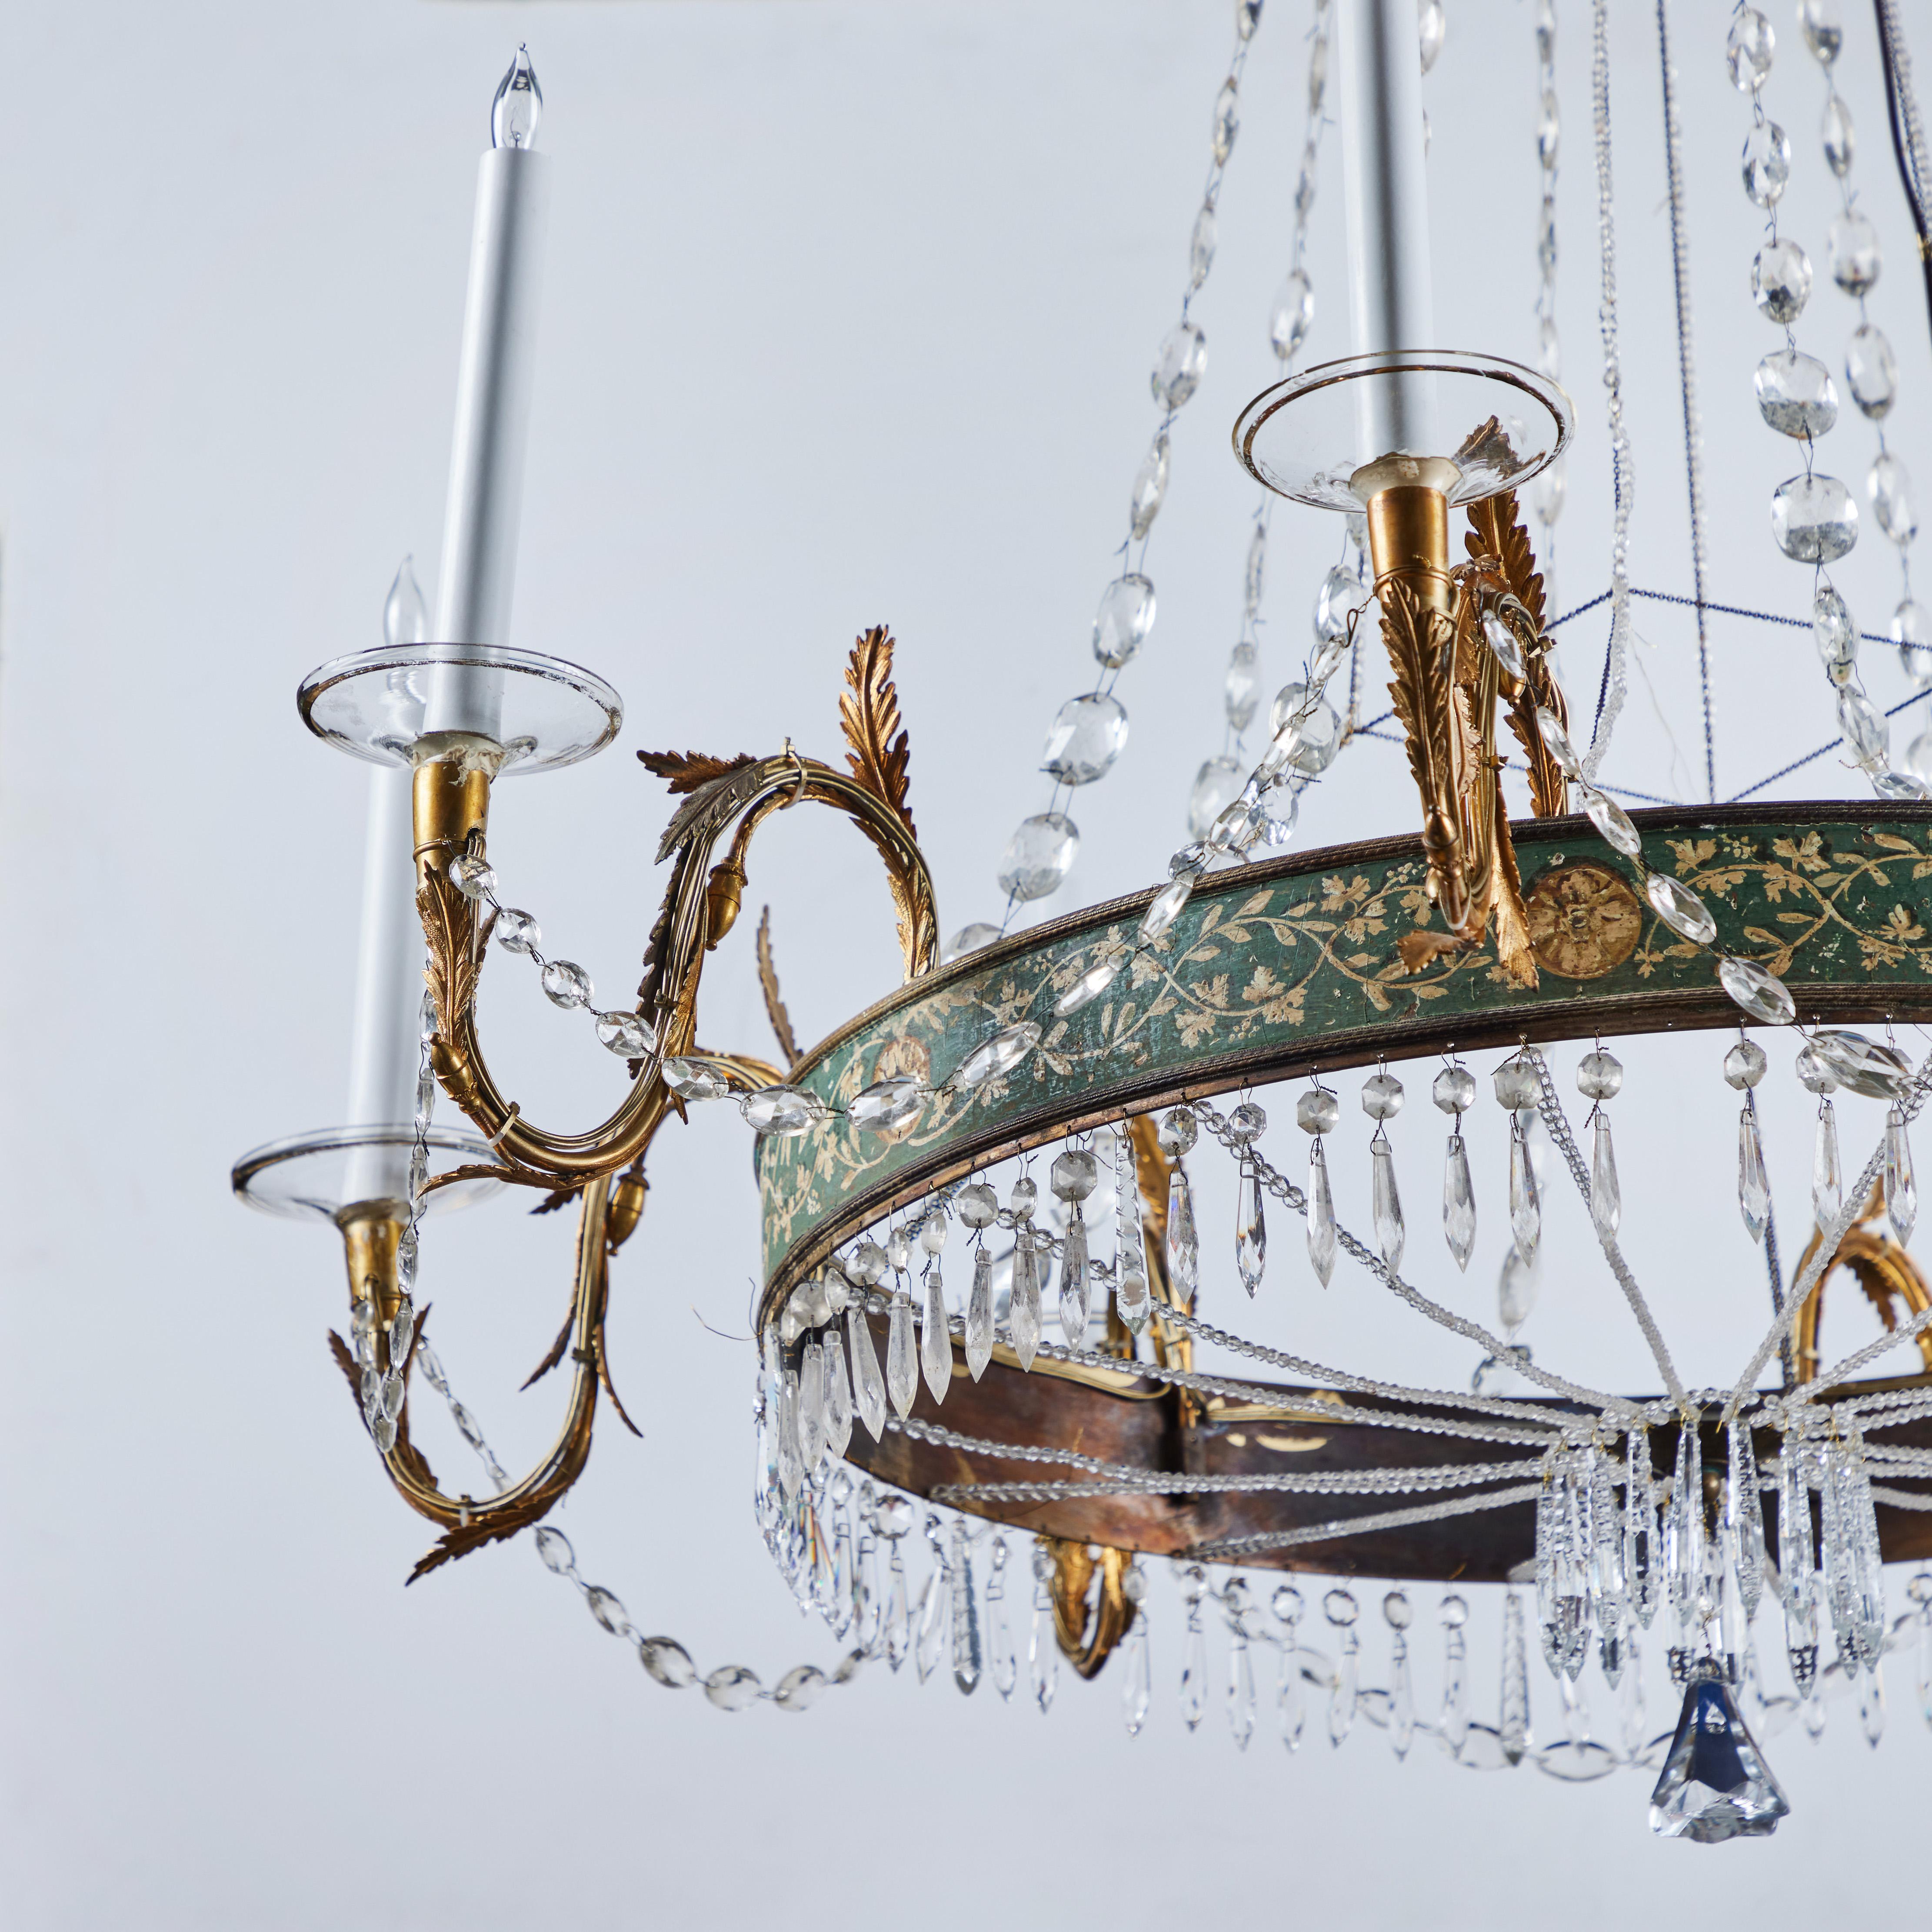 A beautiful crystal chandelier with hand painted bronze ring with foliate and flora designs supporting the elegant 8 gilded bronze arms also with  foliate and flora design, which terminate with glass bobeches supporting the 8 lights.  